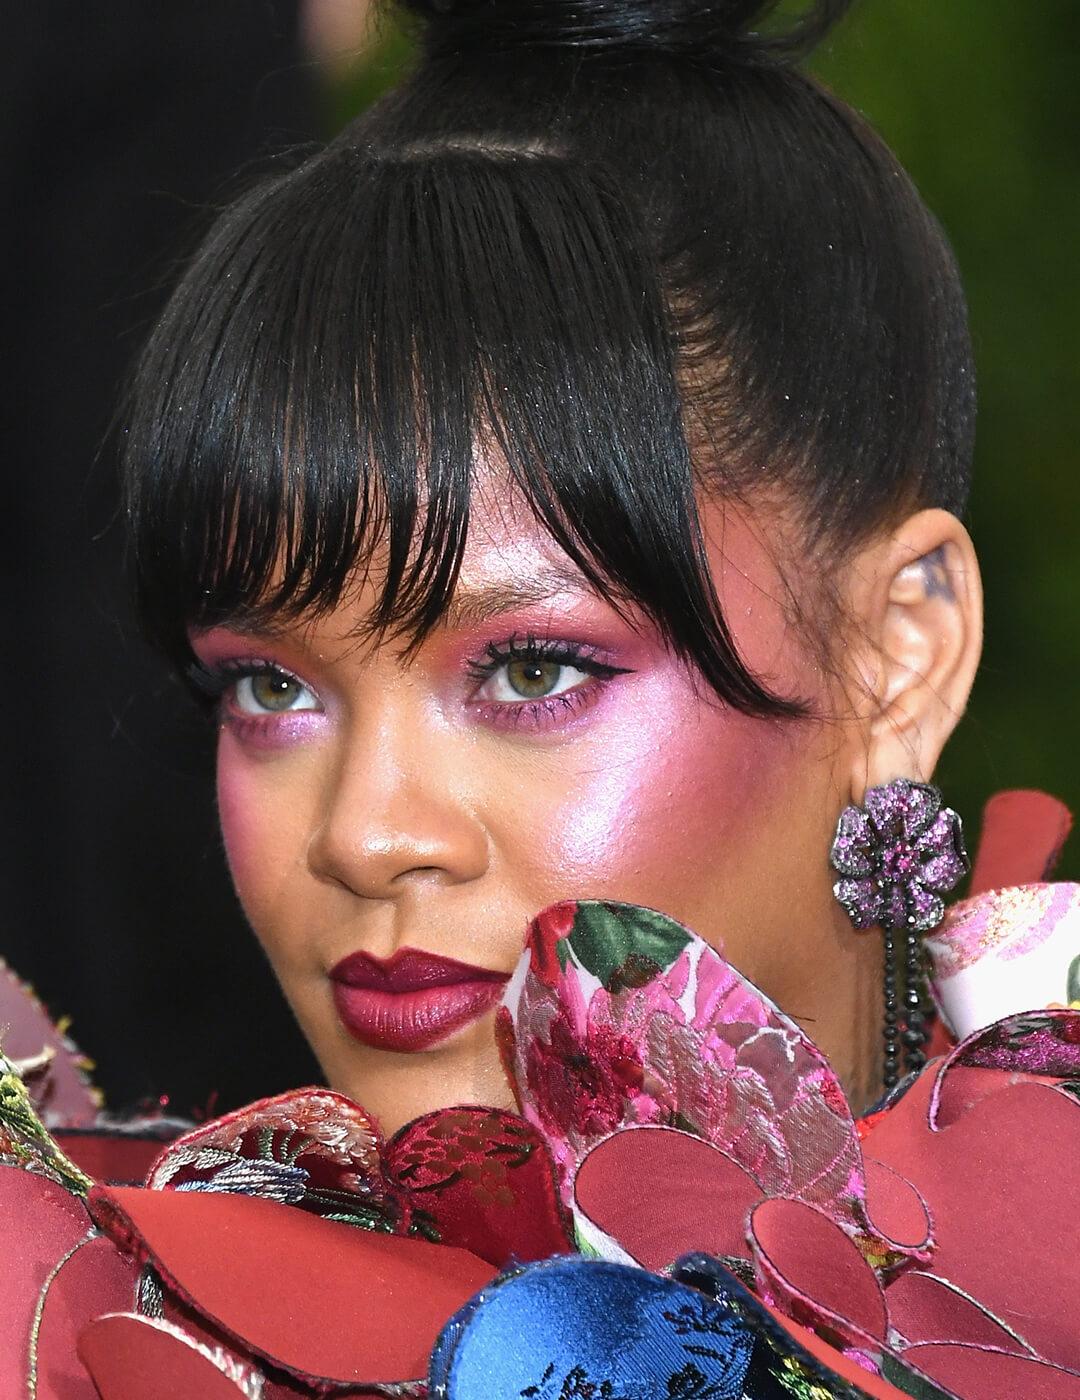 Rihanna rocking an allover blush makeup look and floral and butterfly dress